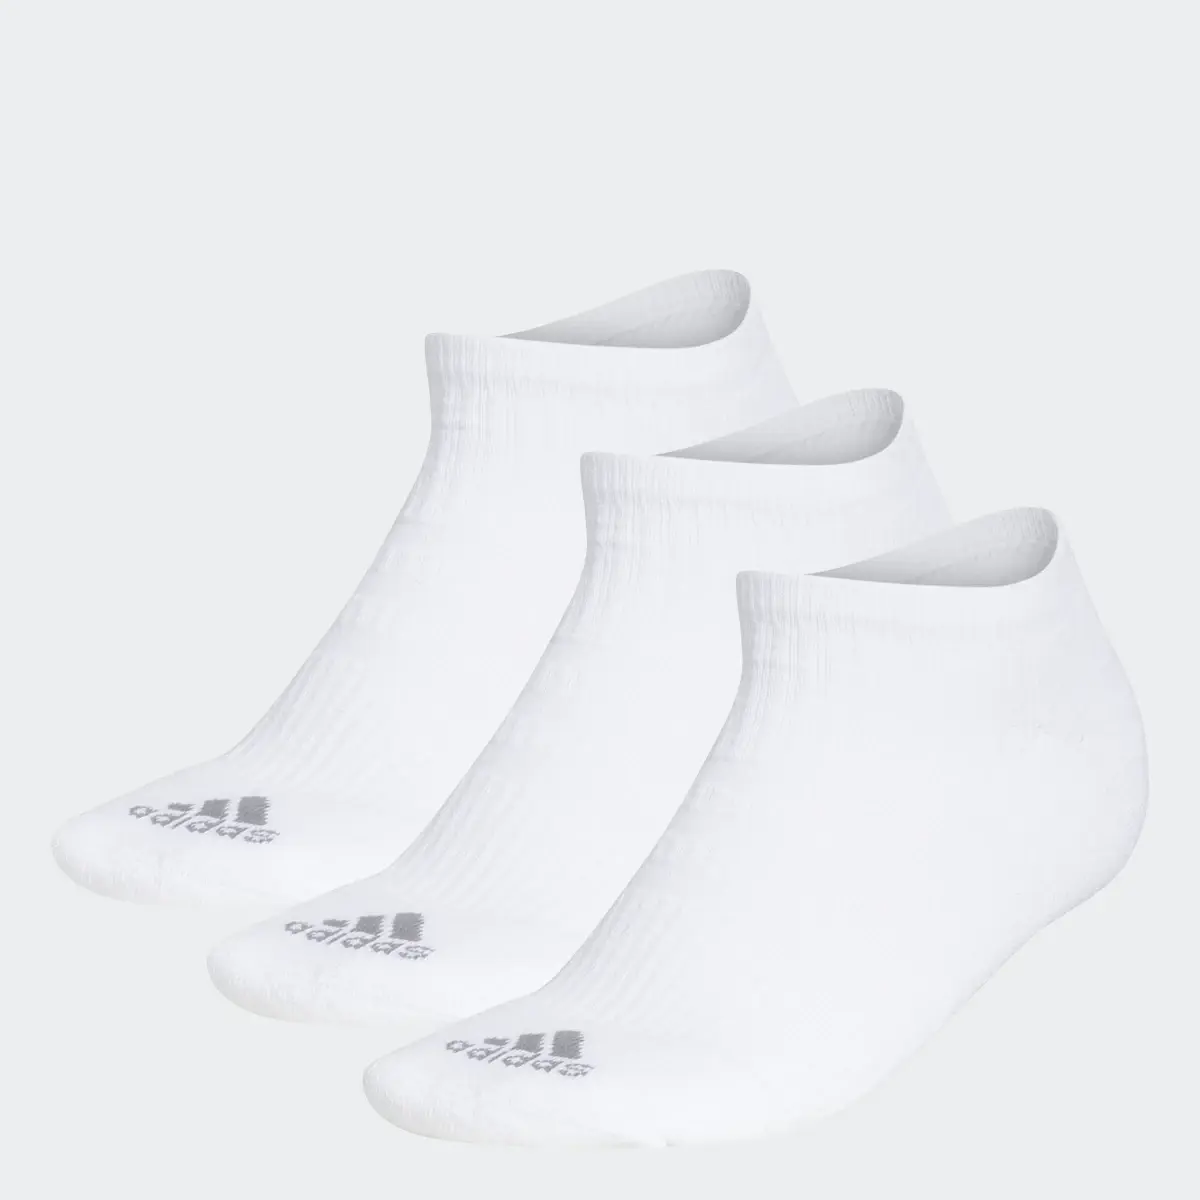 Adidas Chaussettes Comfort Low (3 paires). 1